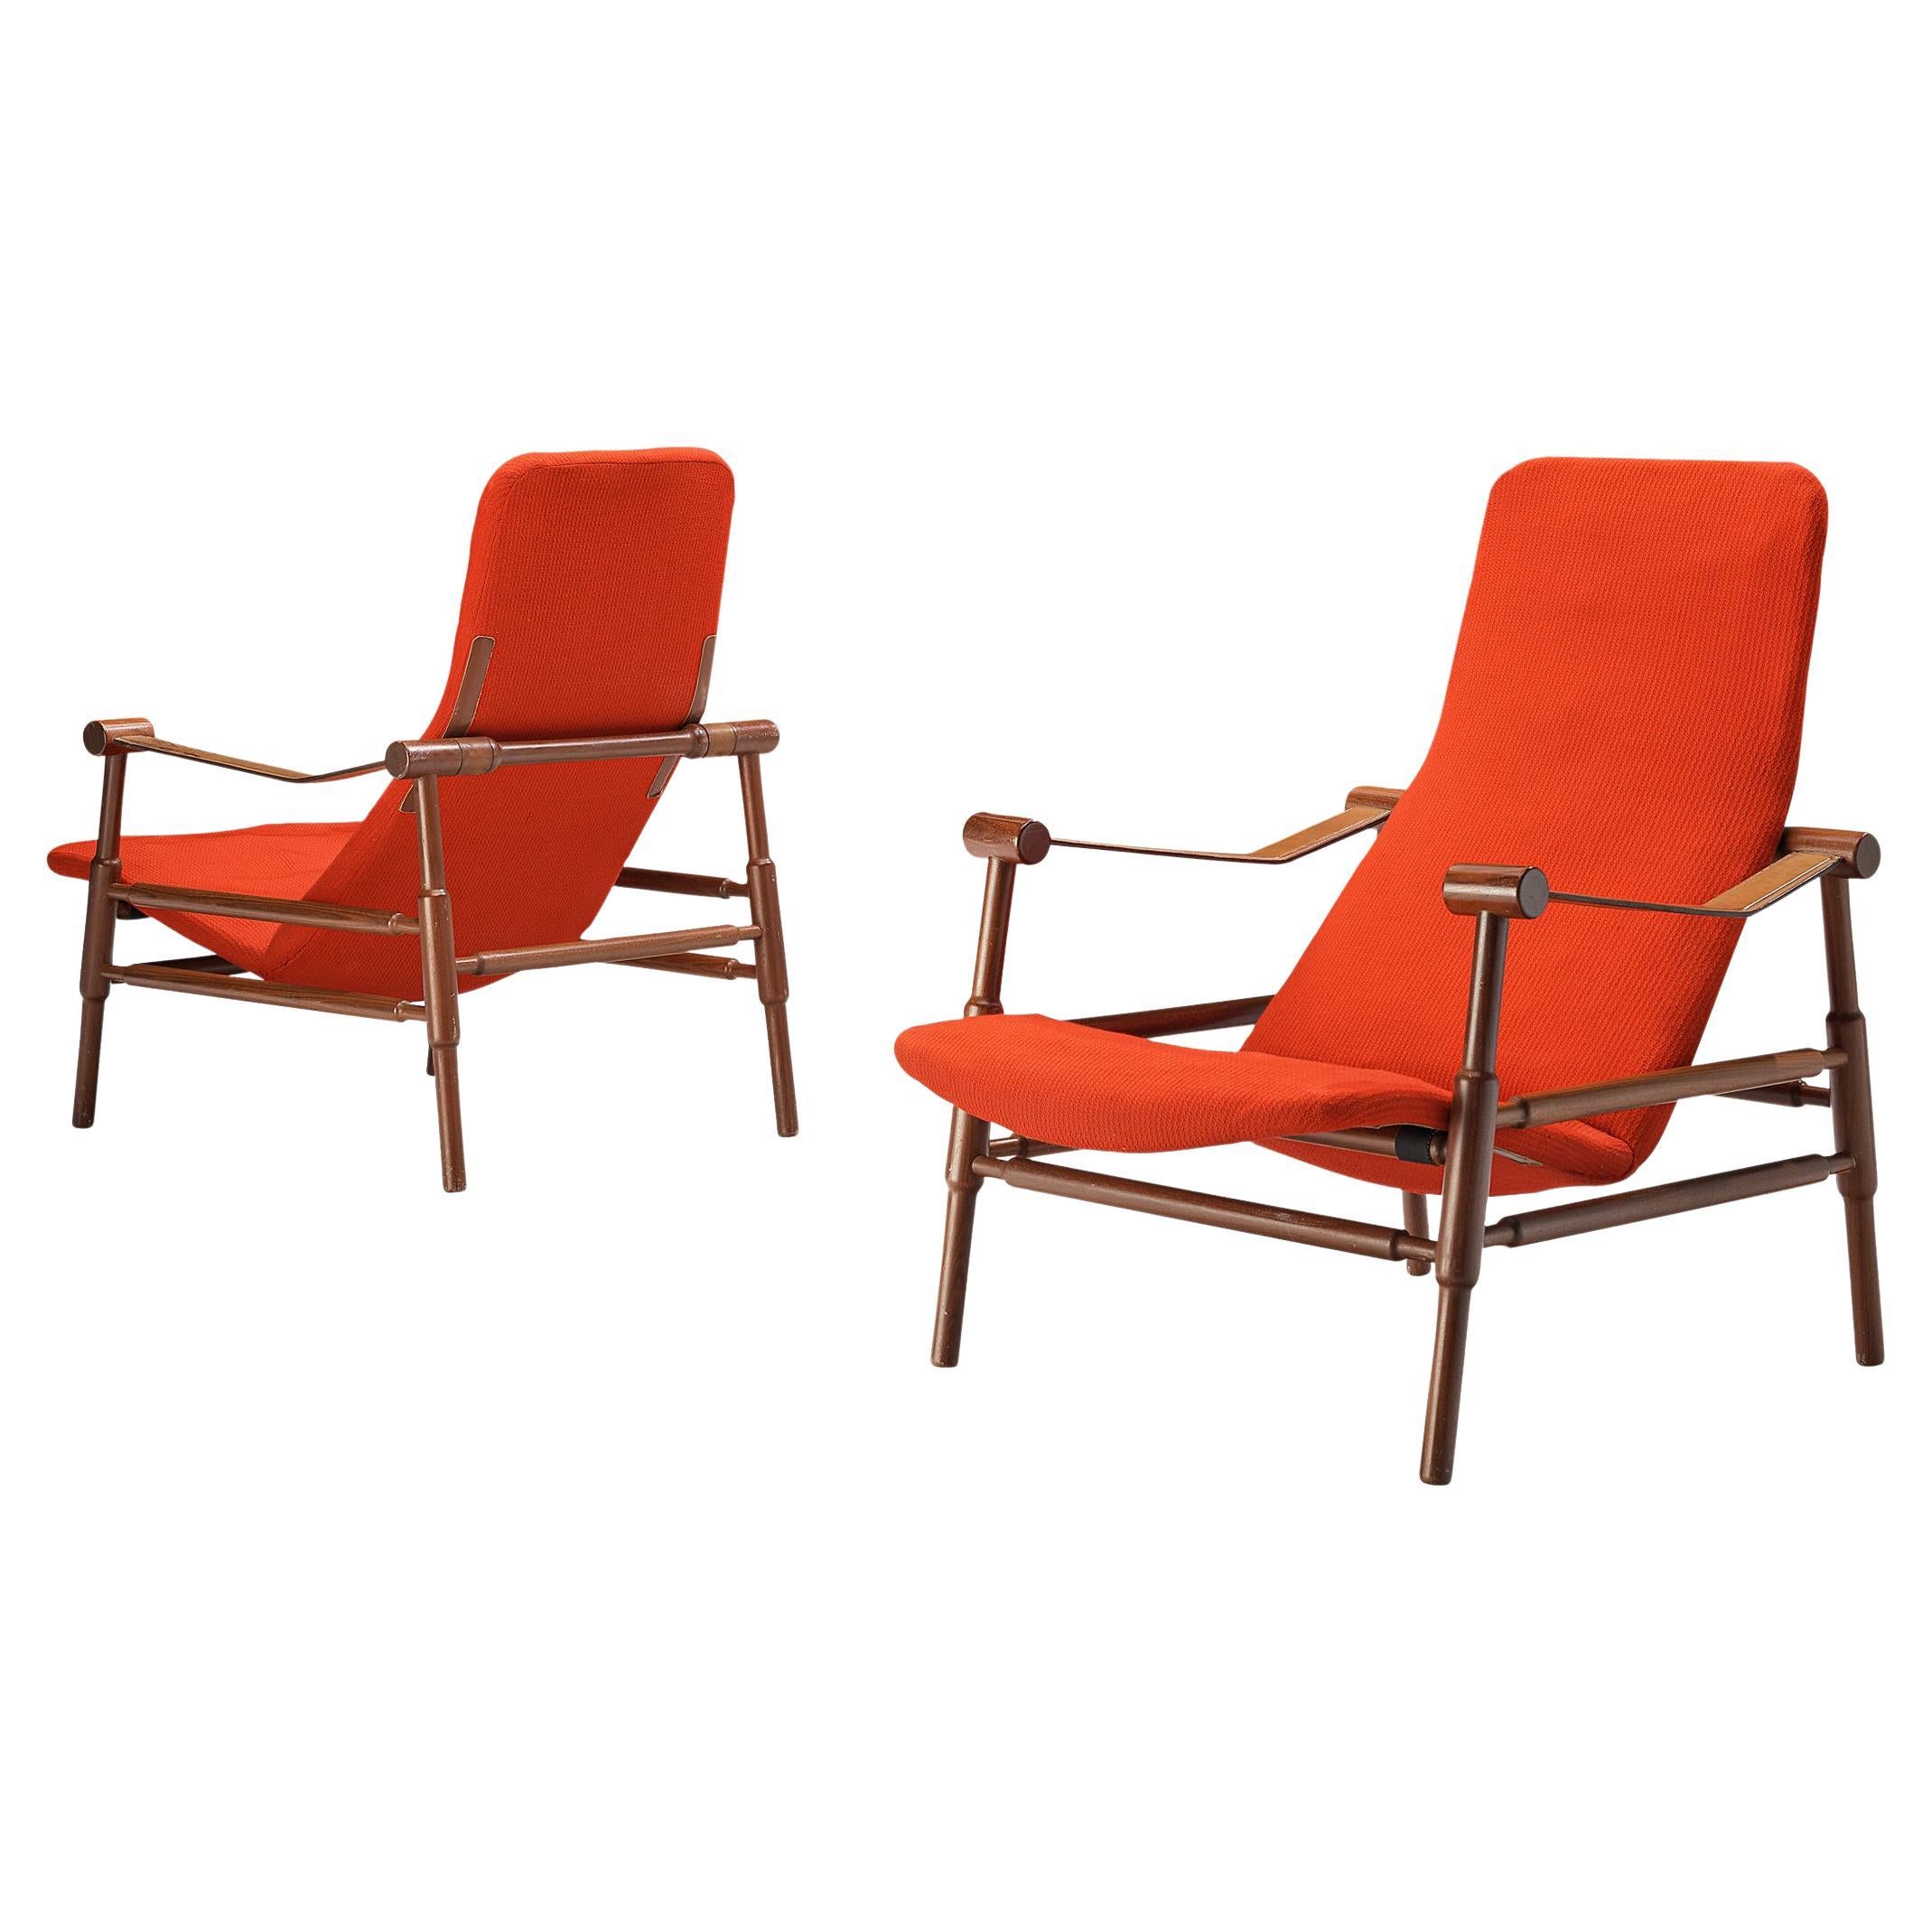 Italian Pair of Lounge Chairs in Red Fabric Upholstery